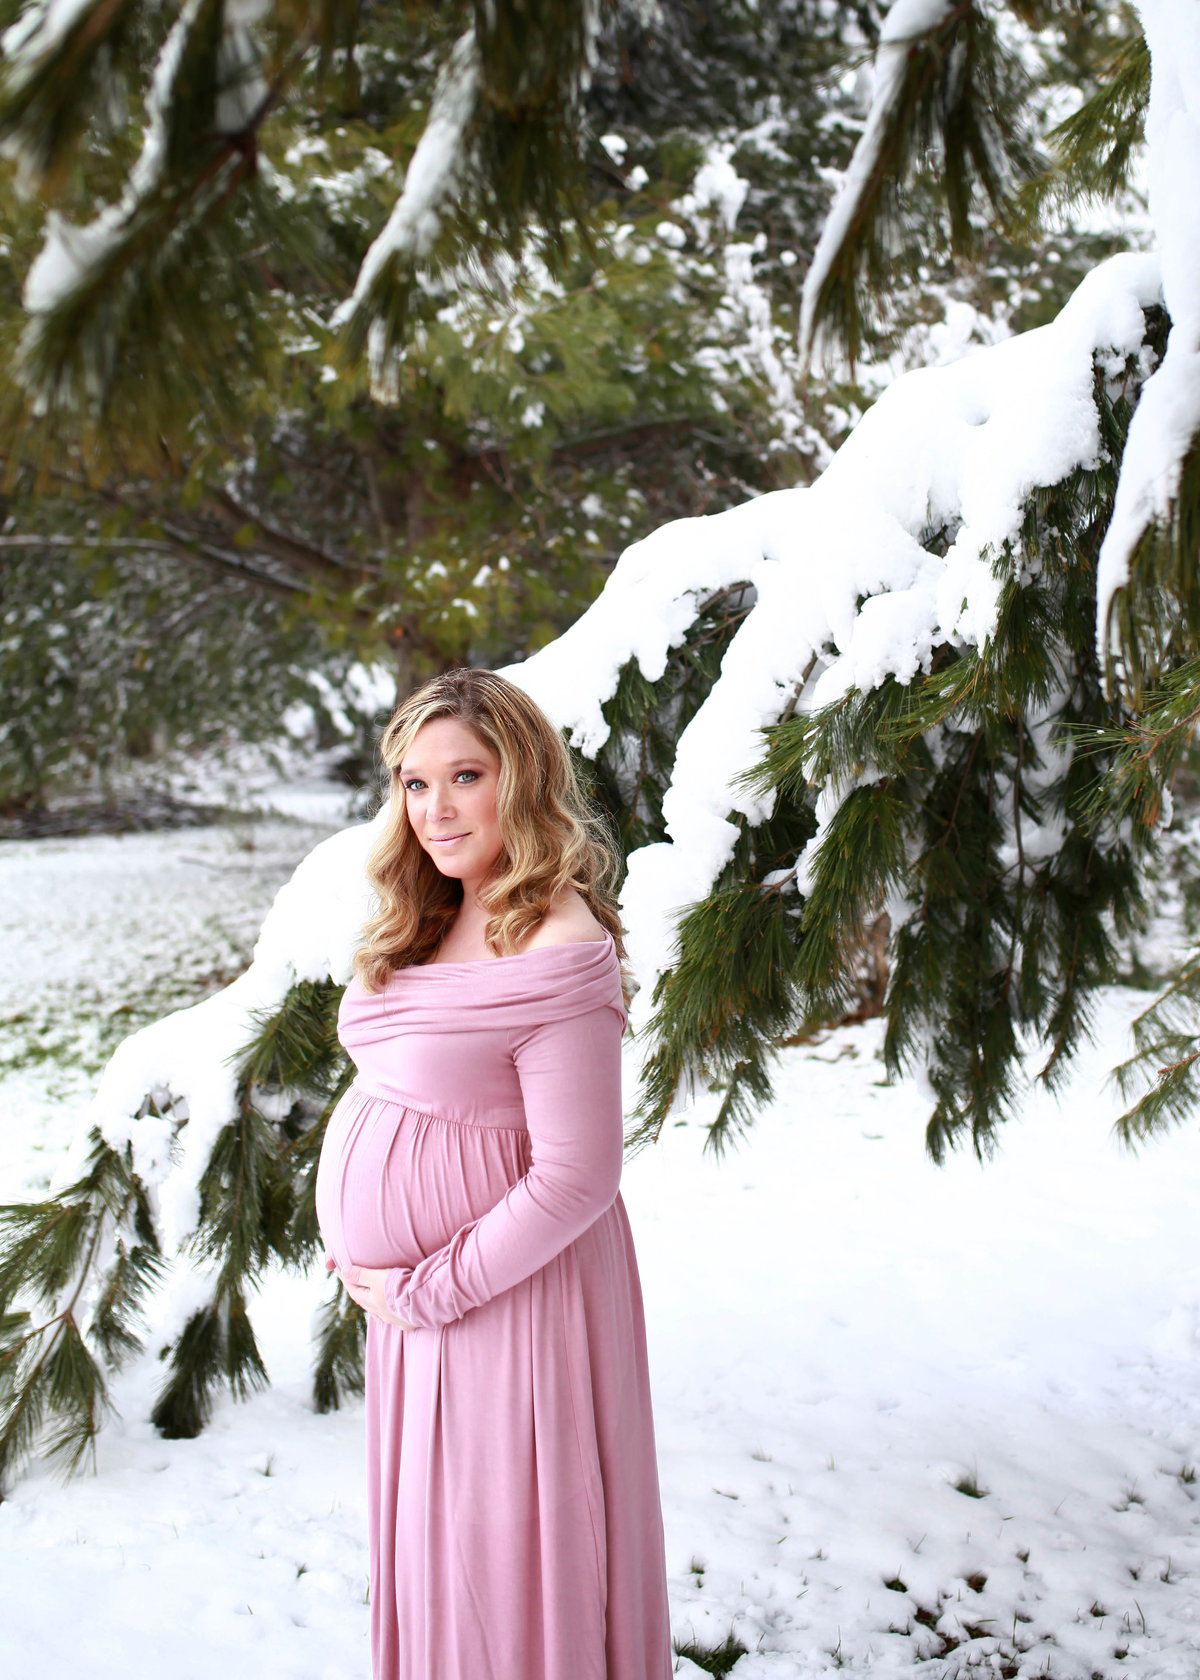 pregant woman with blonde hair in light pink maternity gown against snowy scenery